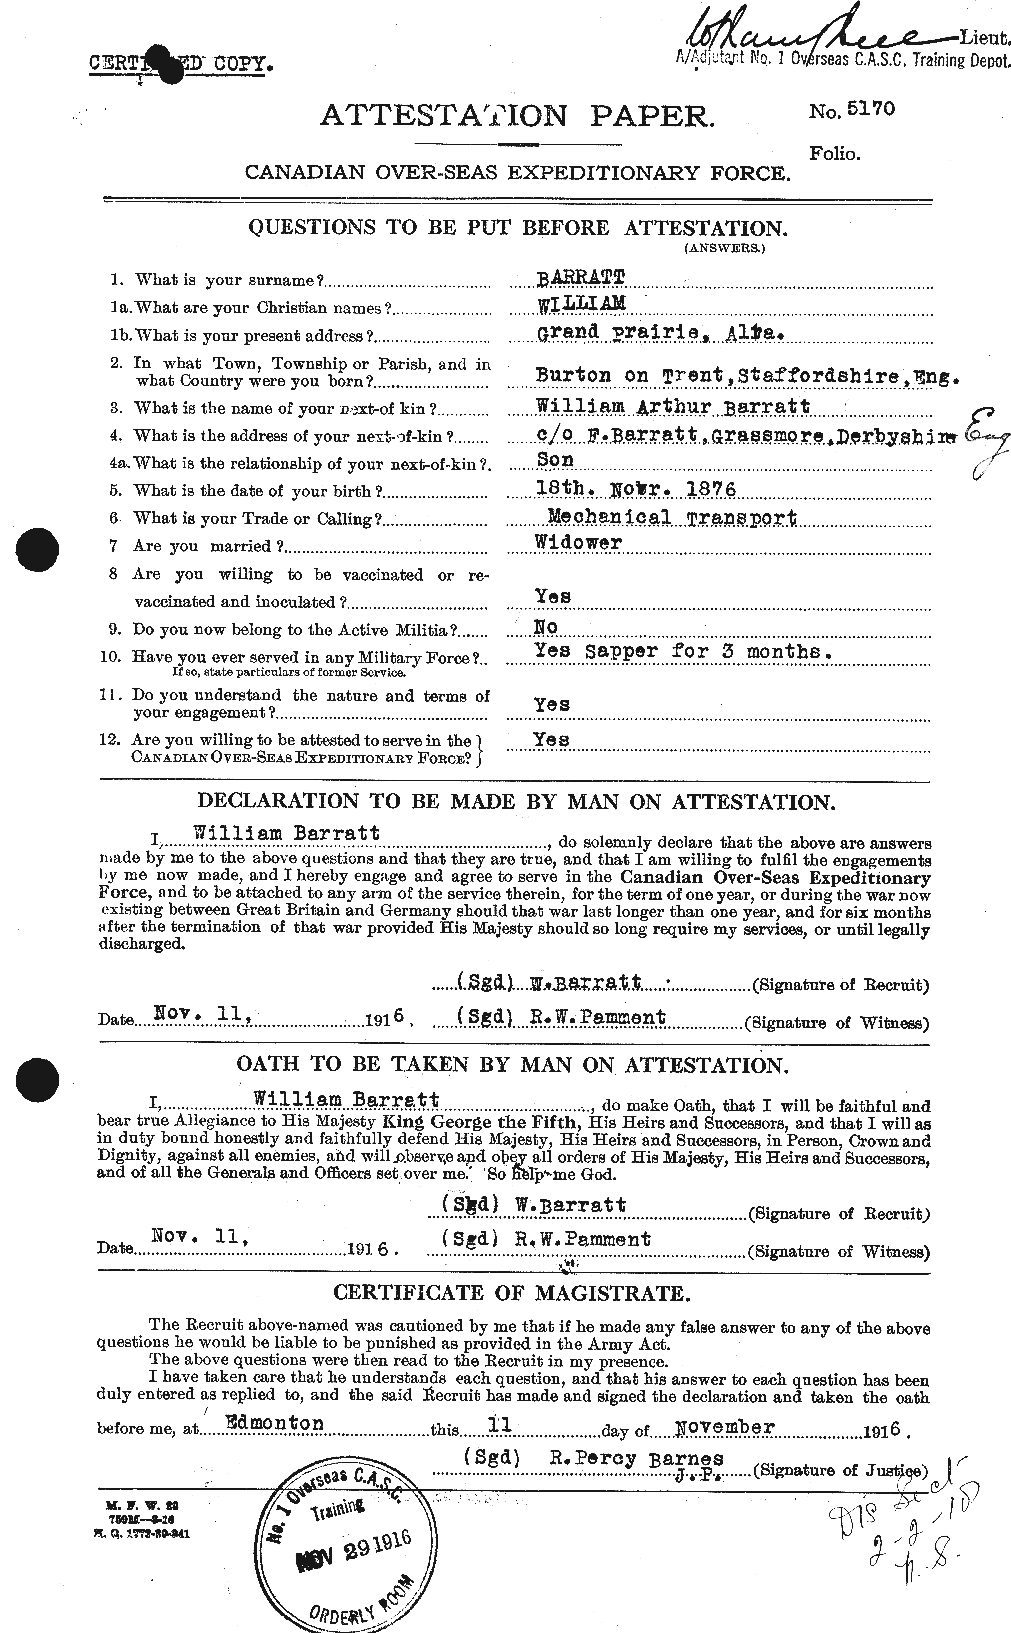 Personnel Records of the First World War - CEF 221955a